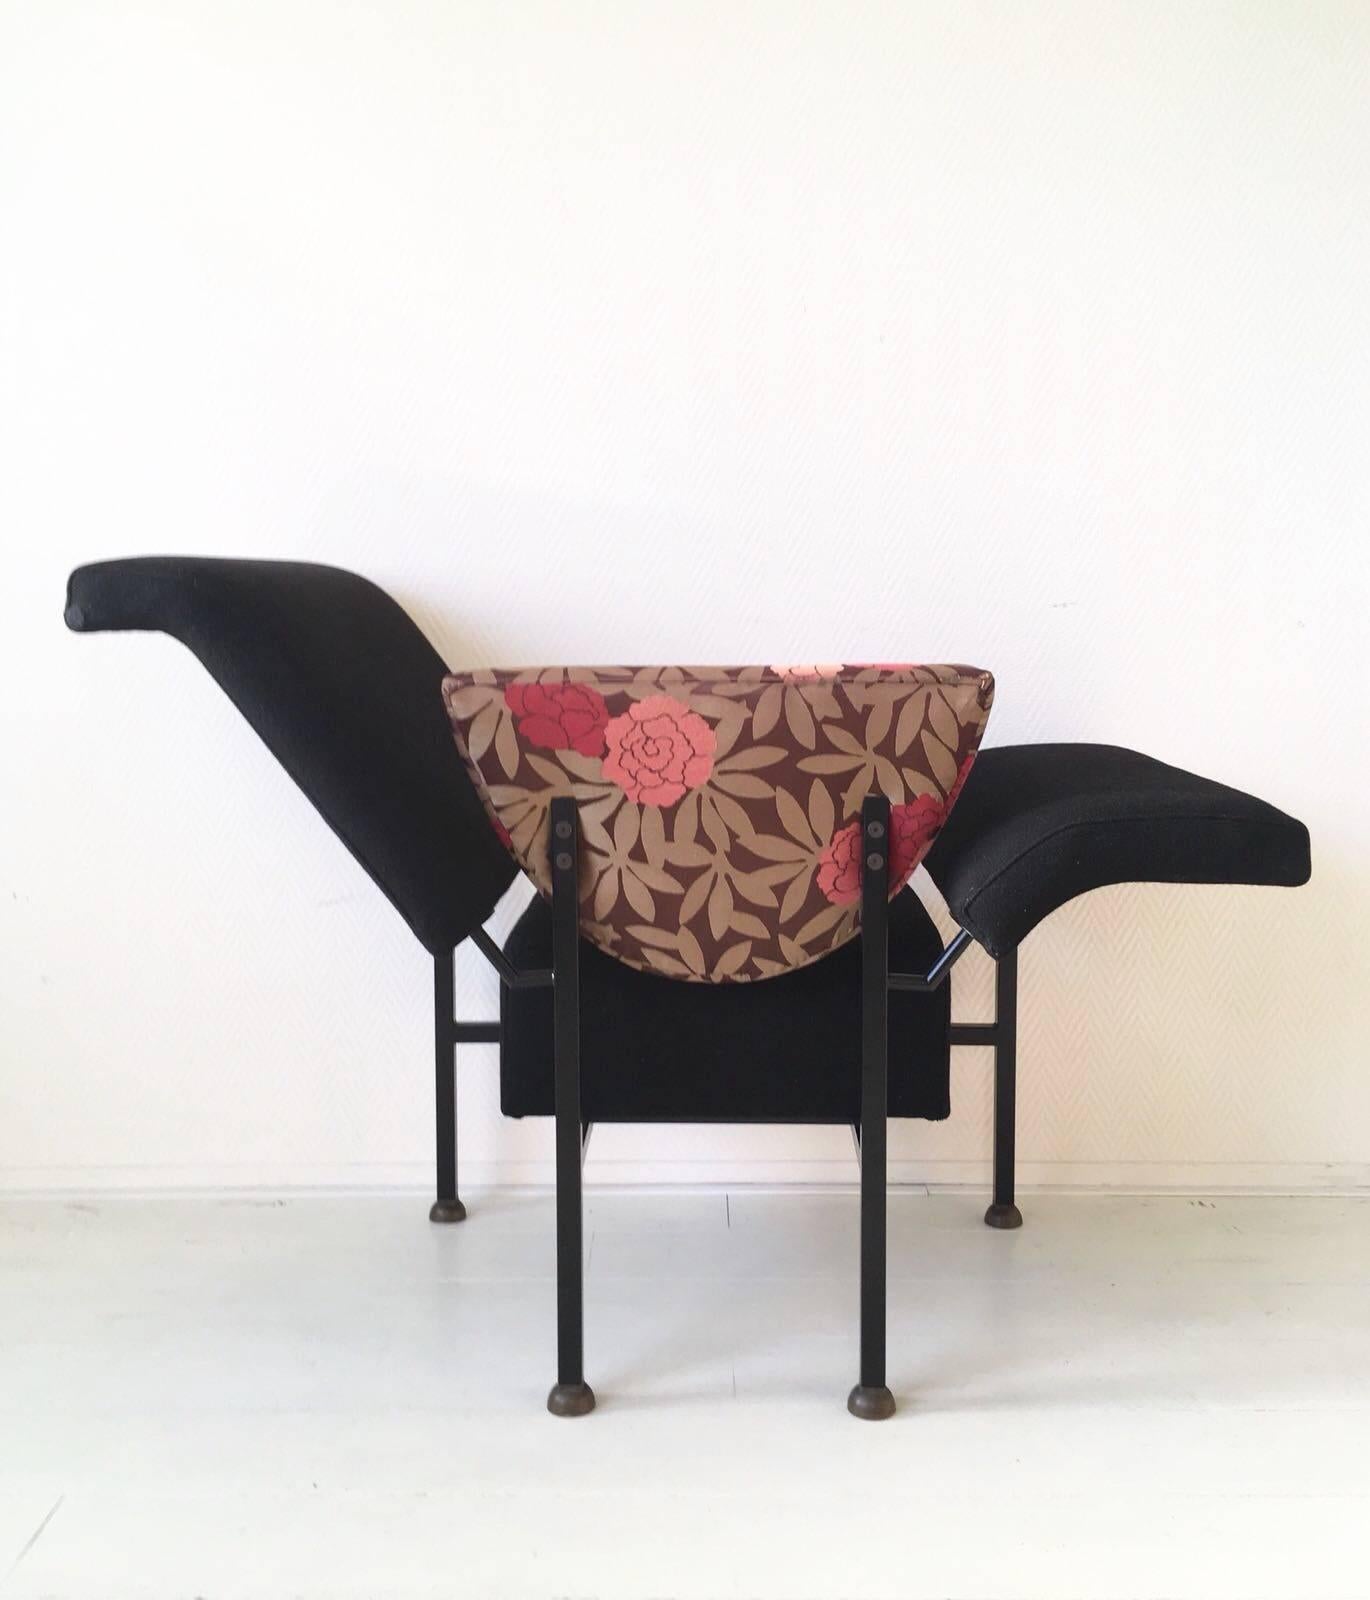 Mid-Century Modern Black Sculptural Easy Chair, 'Greetings from Holland', by Rob Eckhardt, 1980s